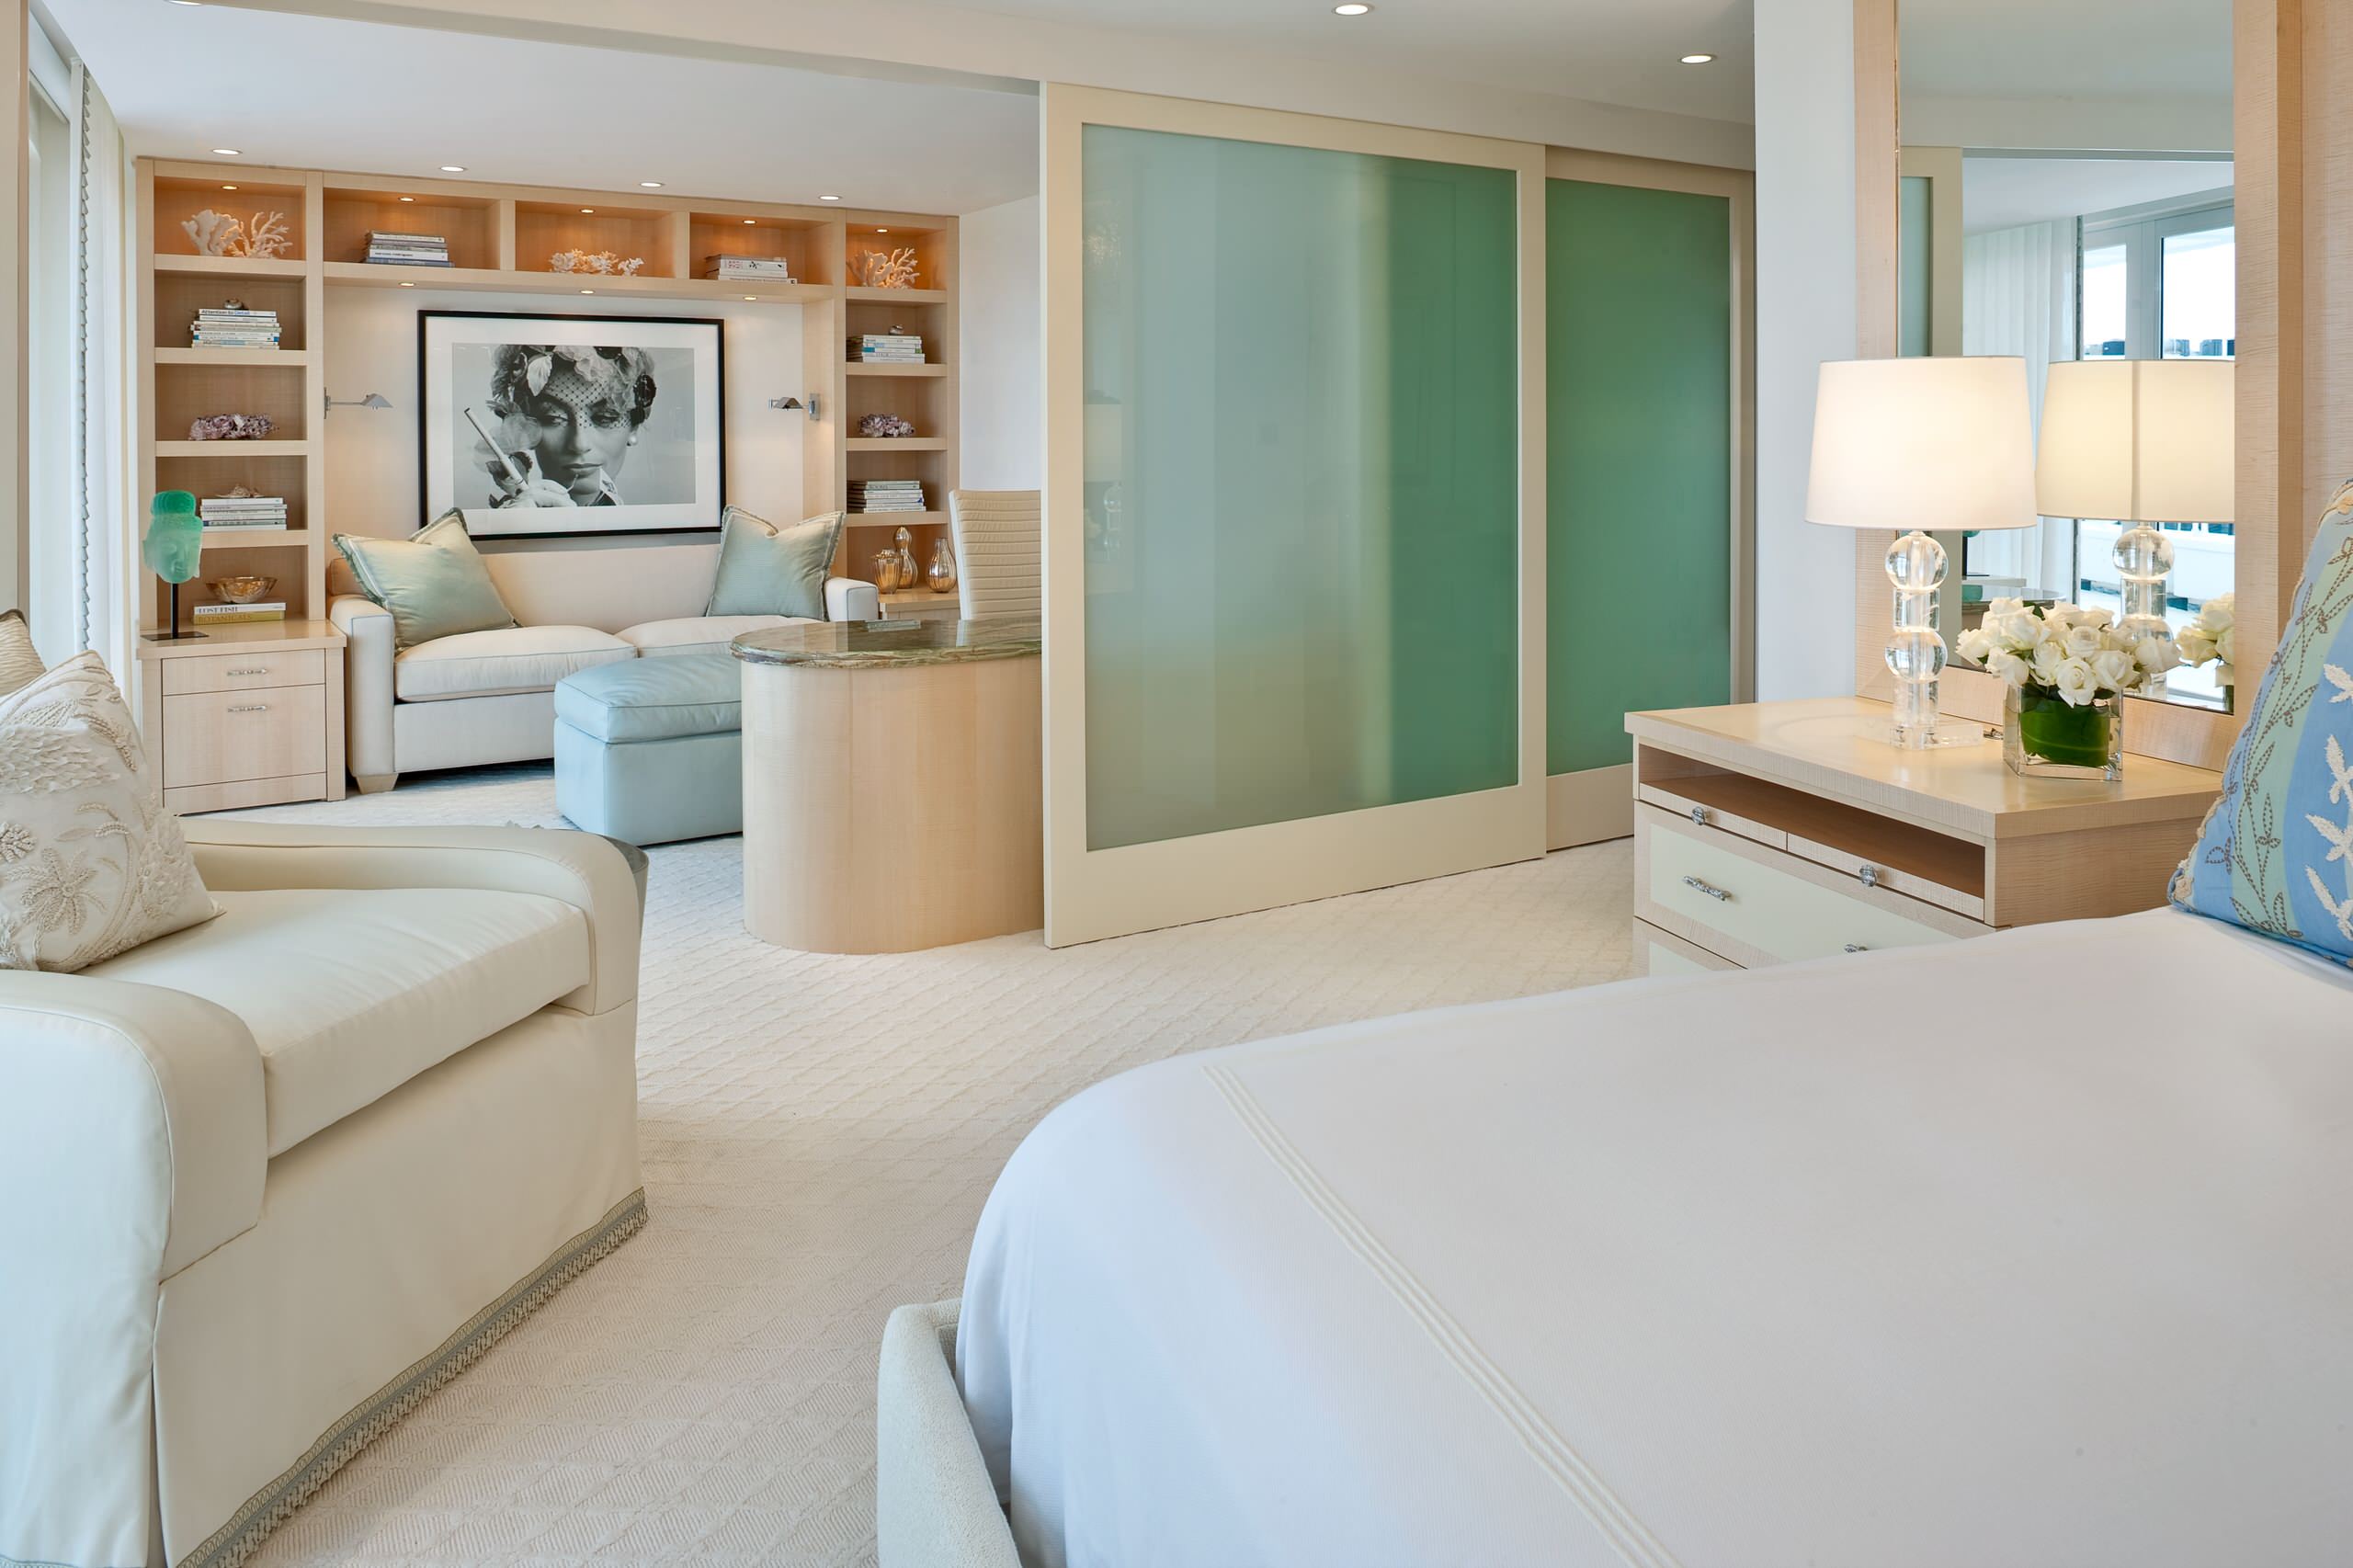 Master Bedroom Sitting Area Houzz, How To Decorate Master Bedroom With Sitting Area